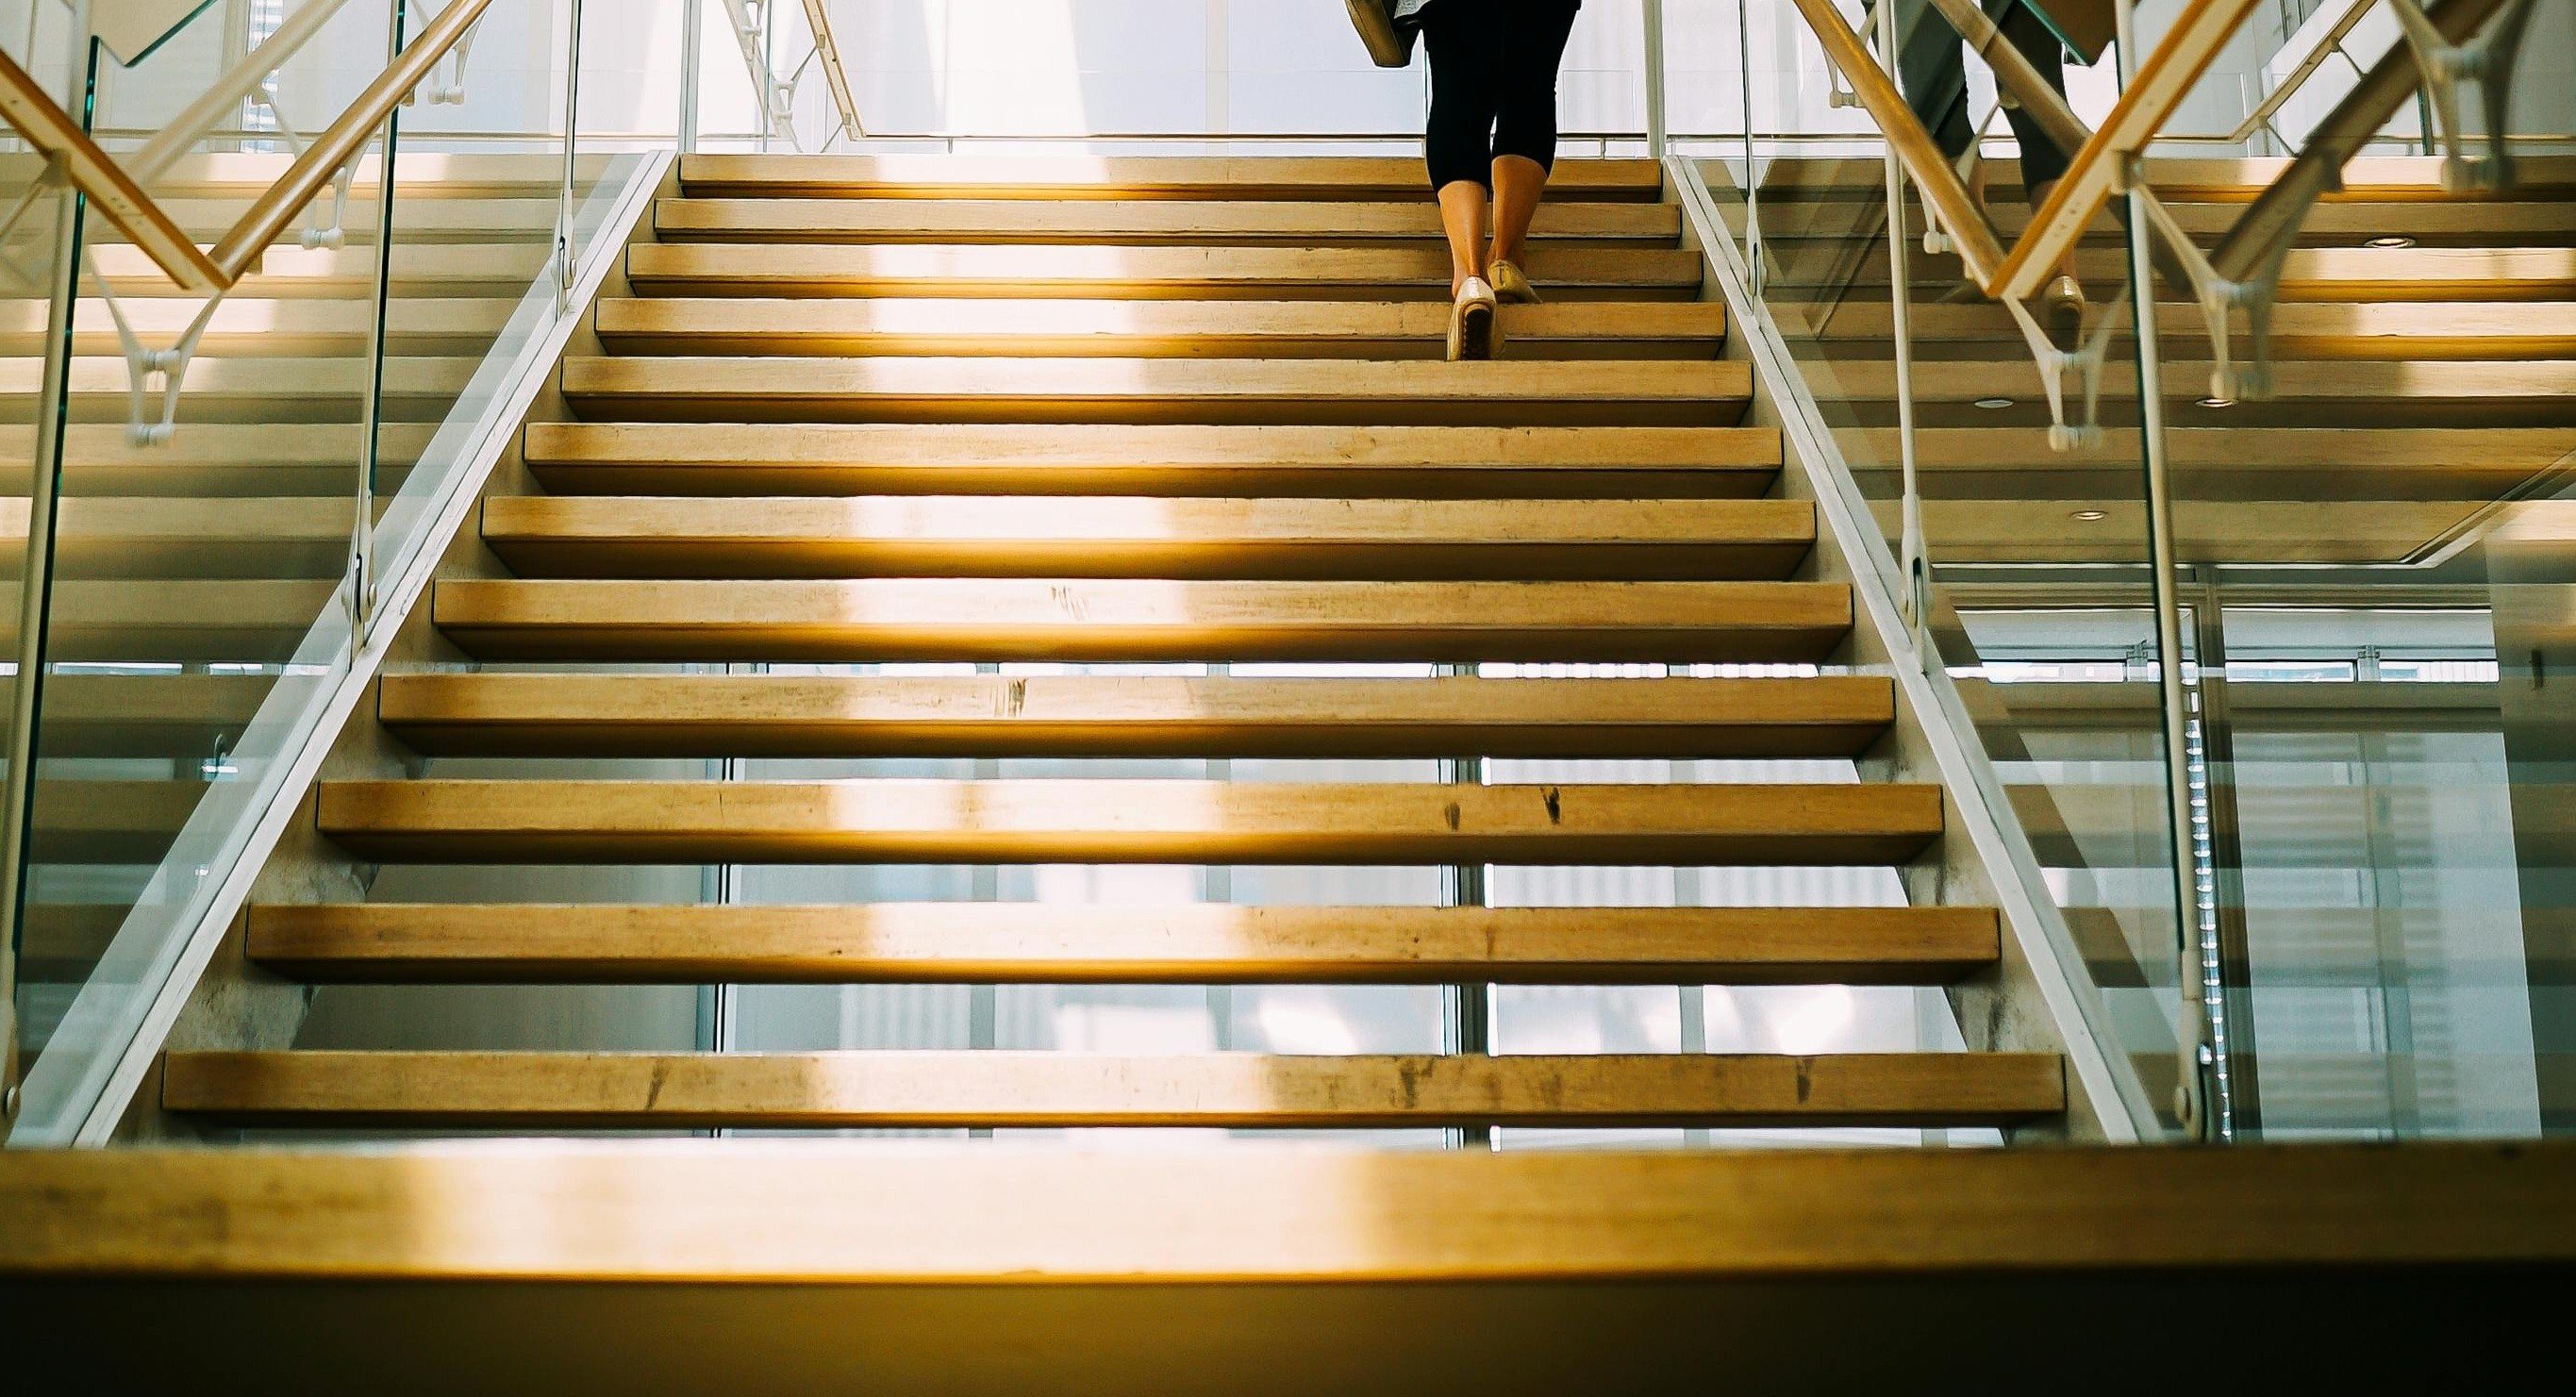 An individual ascending a staircase, with a focus on the act of walking up steps.